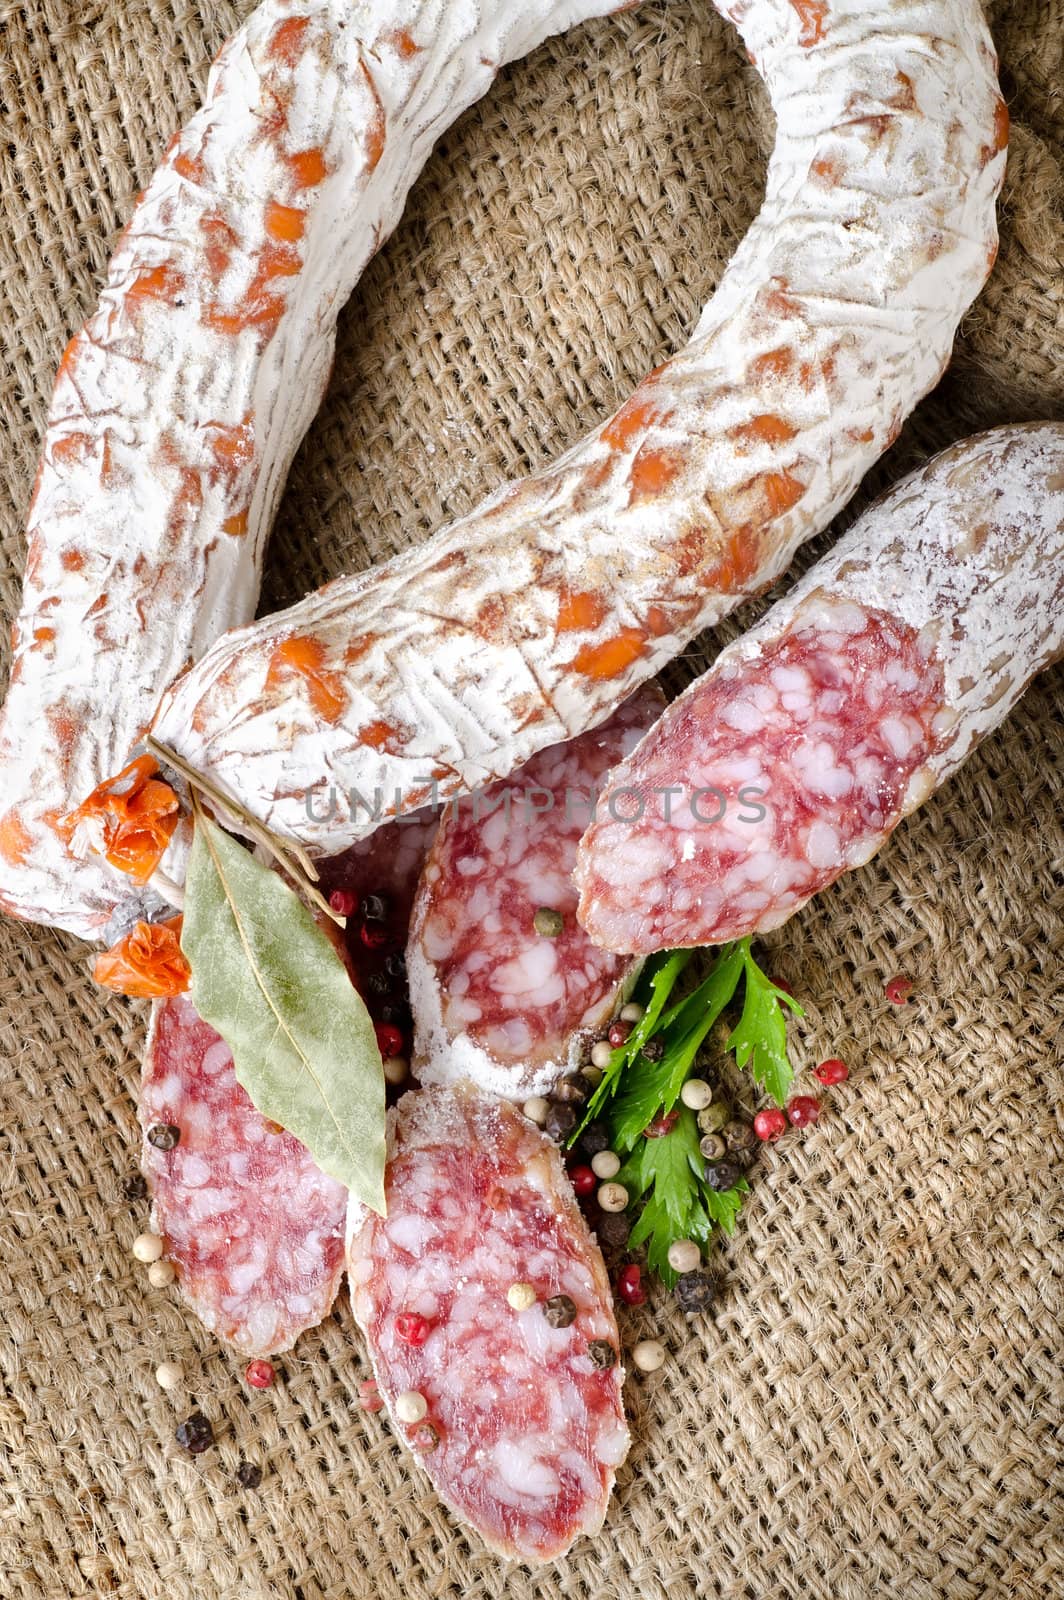 Salami sausage on a canvas by Givaga